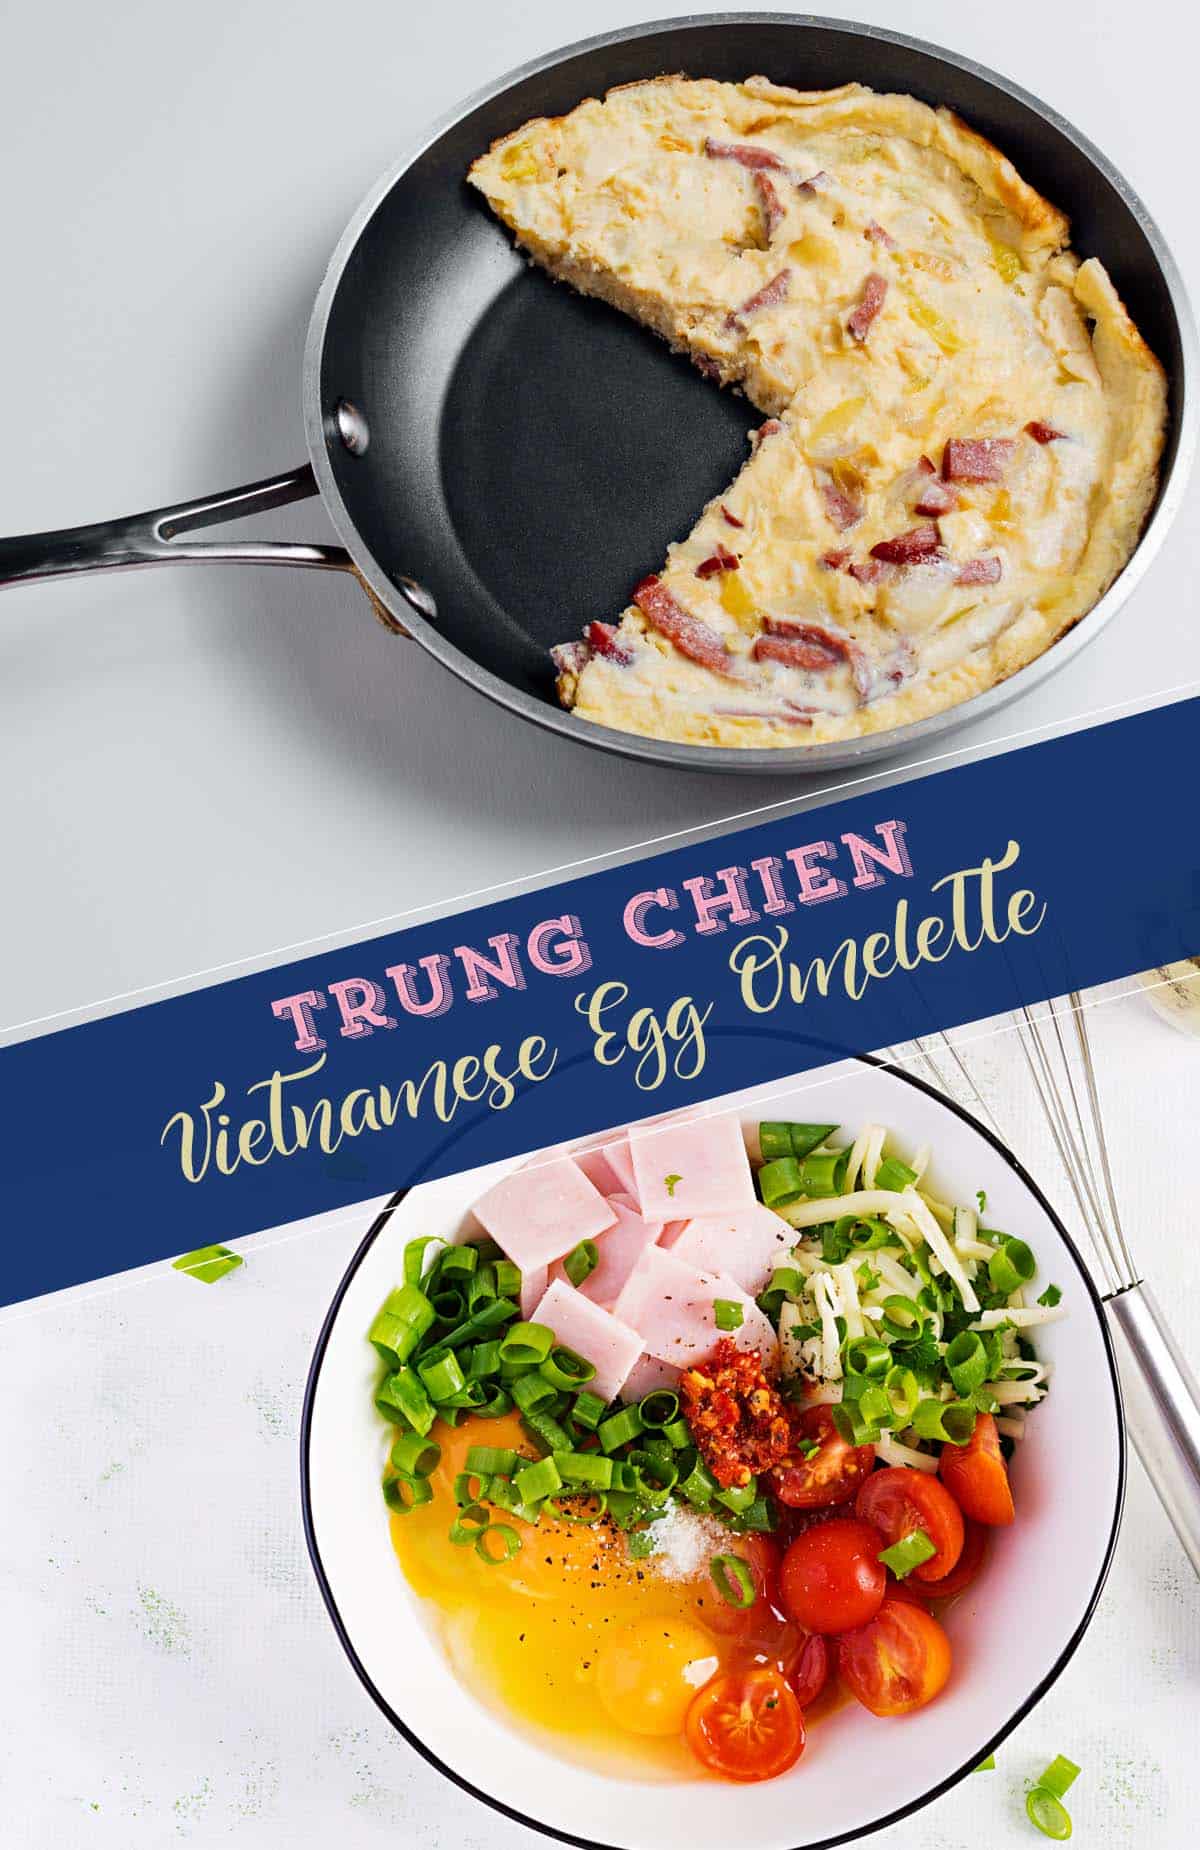 The Vietnamese omelette is a versatile dish that can be enjoyed in many ways. It can be served as a standalone dish or paired with various side dishes, such as rice, salad, or pickled vegetables.